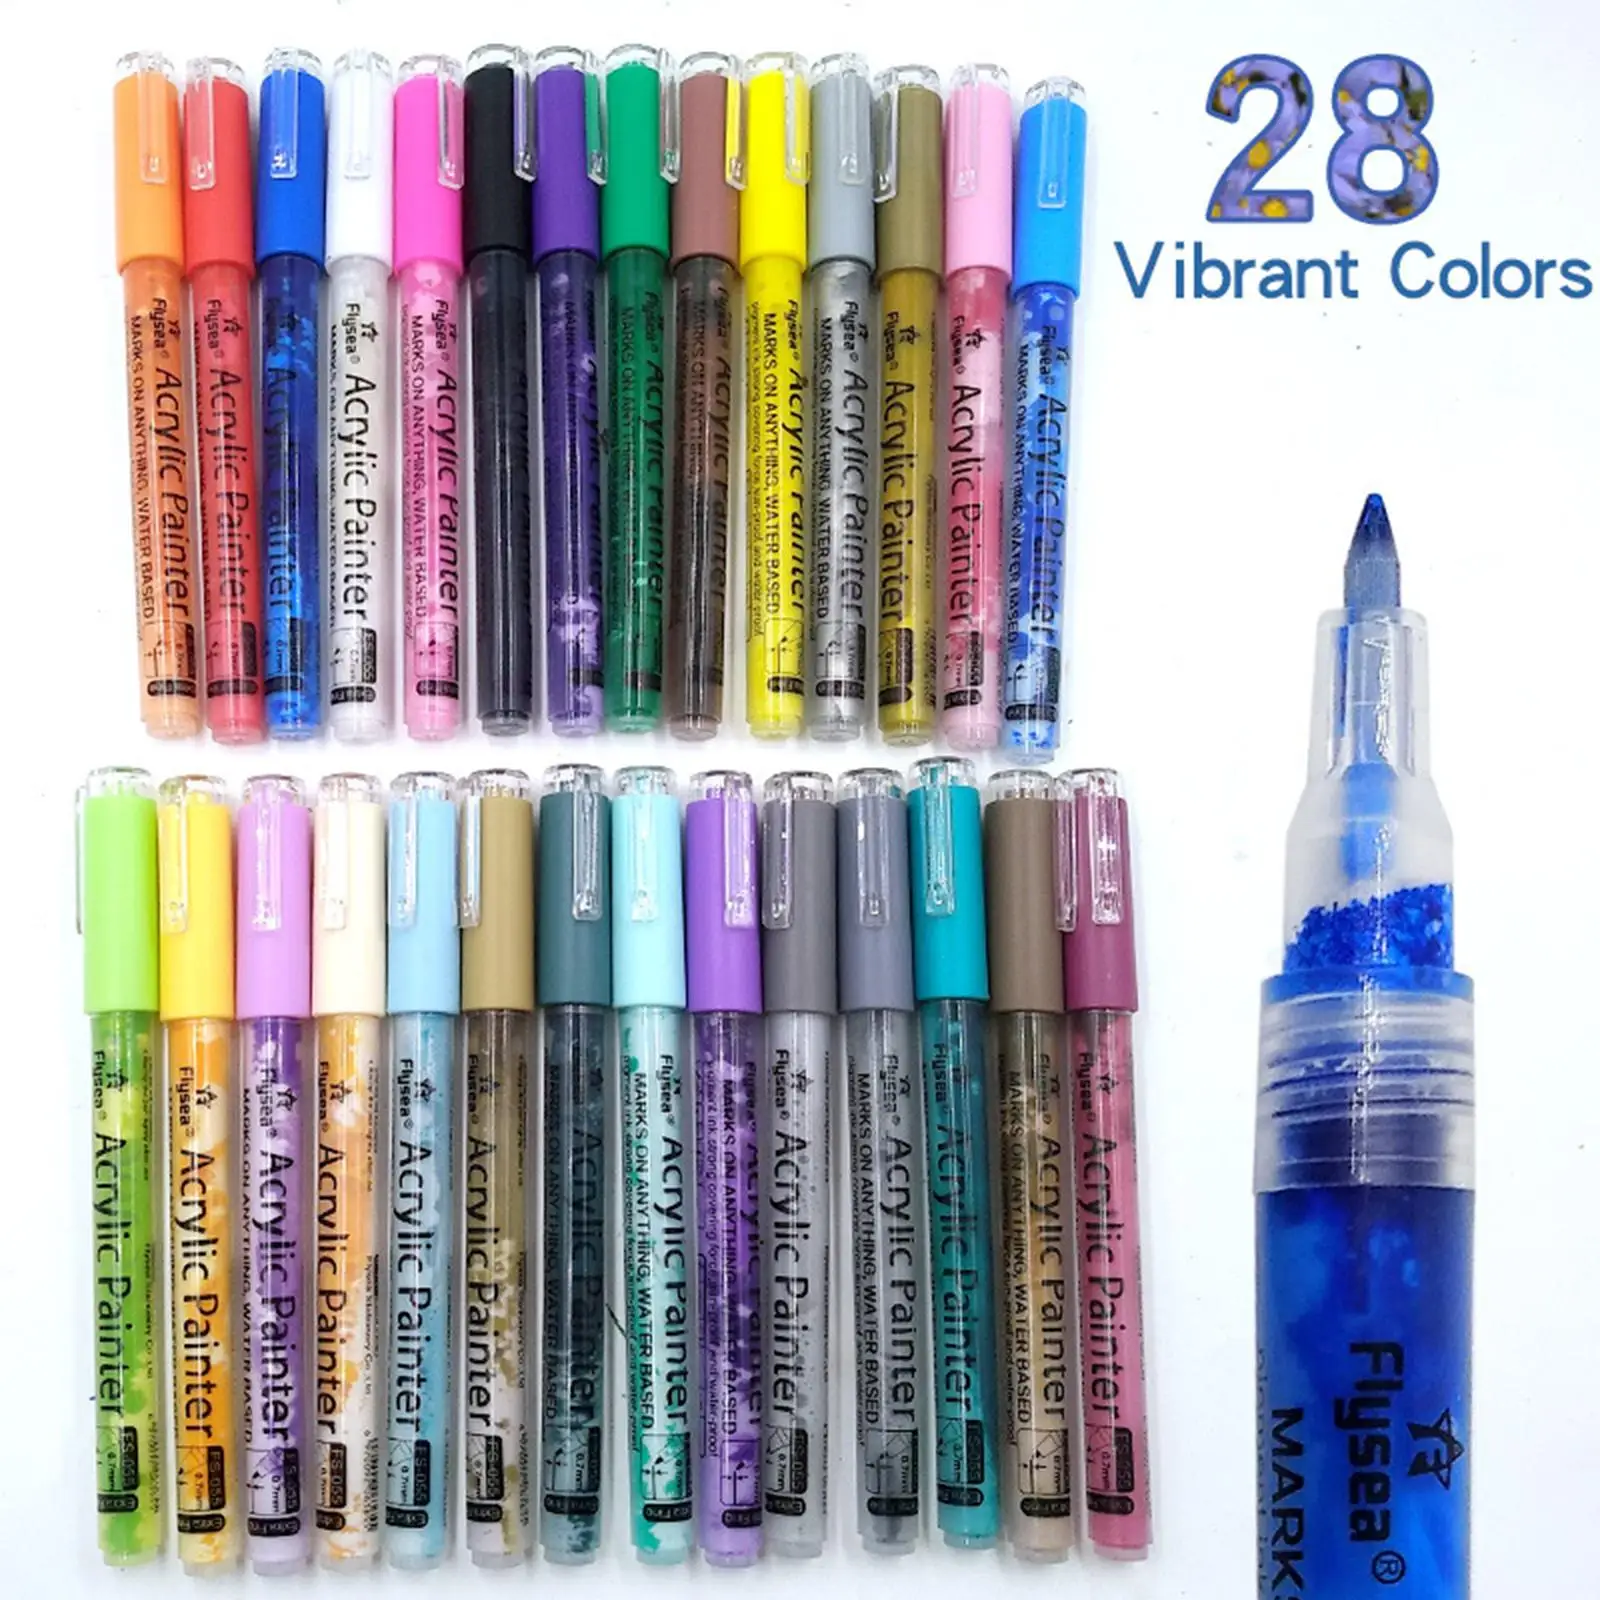 Acrylic Paint Pens 0.7mm 28 Colors Glass Markers Scrapbooking Writing Pens